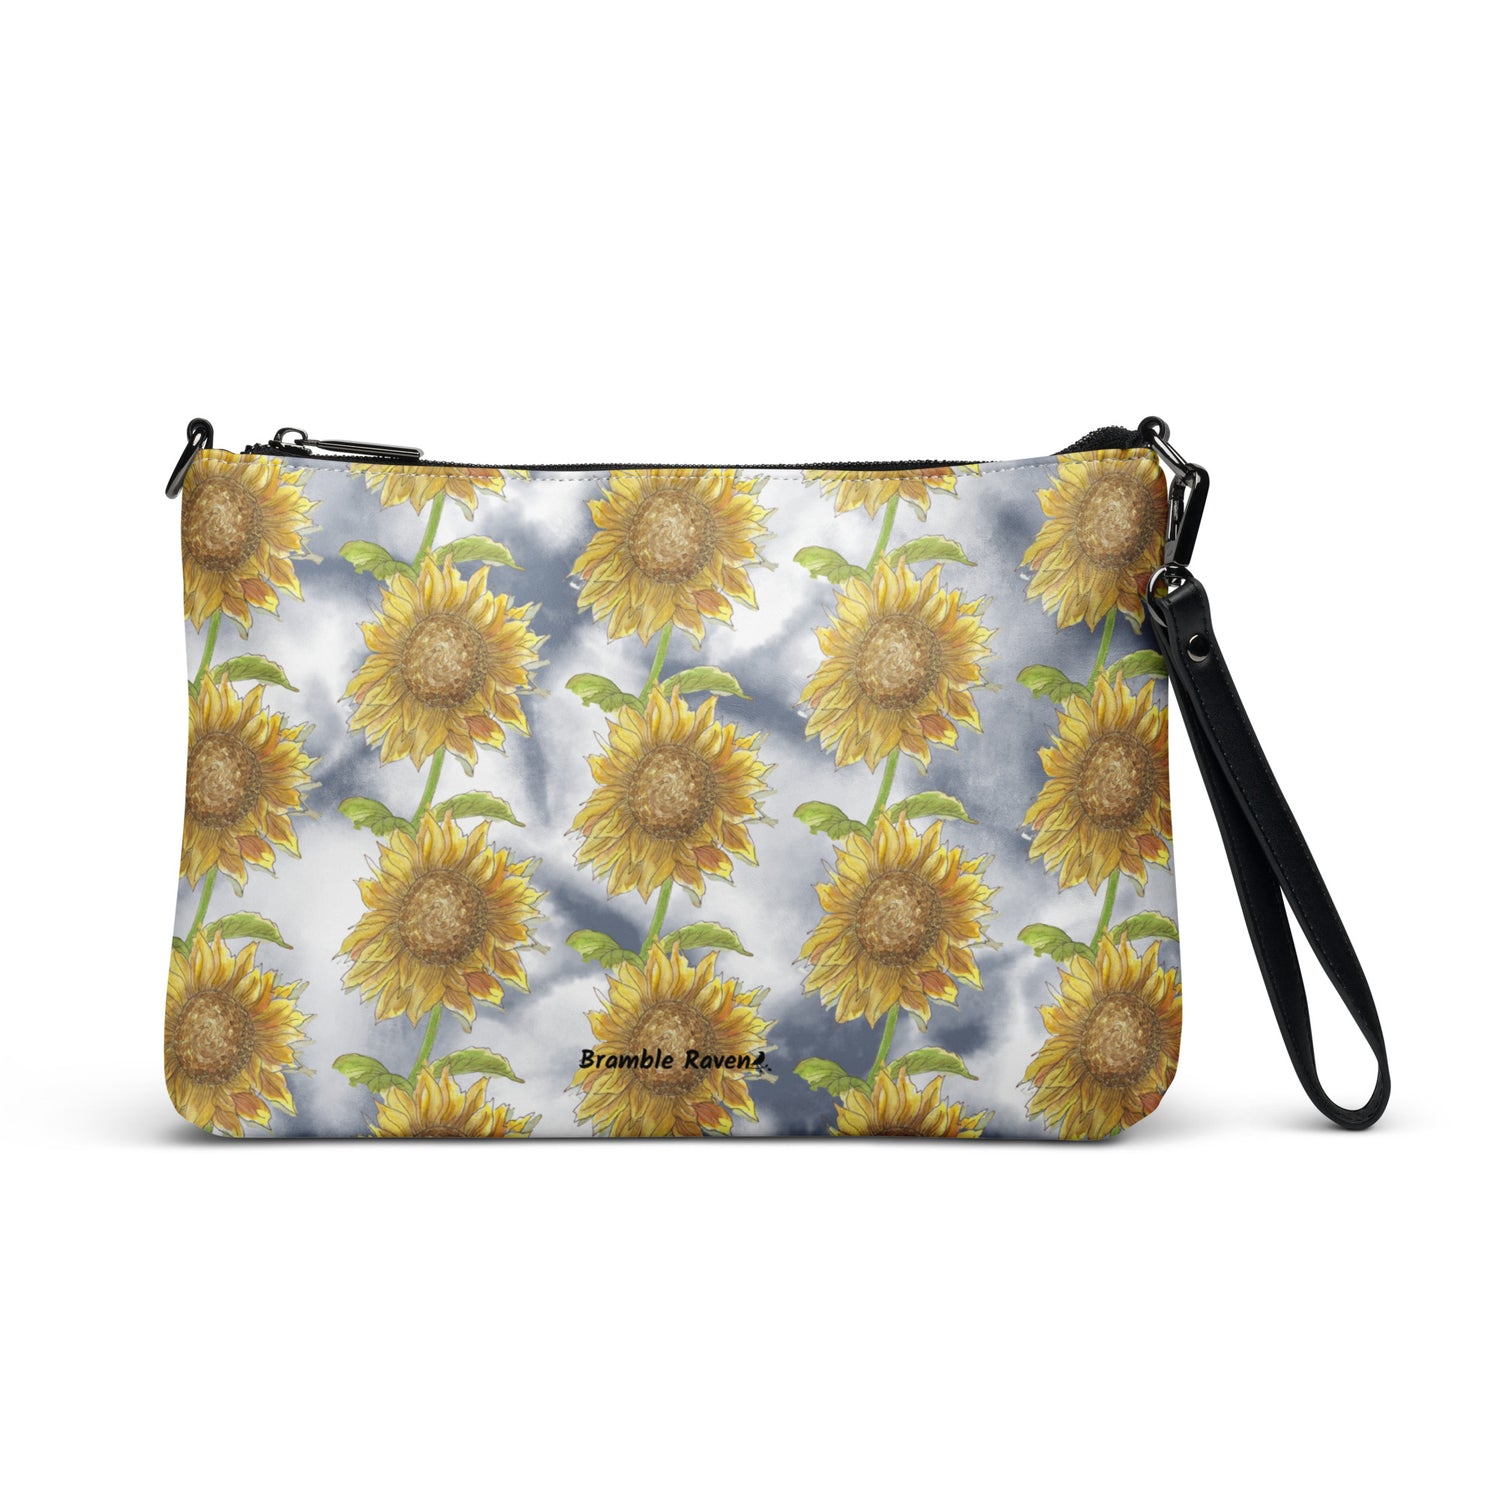 Sunflower crossbody bag. Faux leather with polyester lining and dark grey hardware. Comes with adjustable removable wrist and shoulder straps. Features patterned design of watercolor sunflowers against a cloudy background.